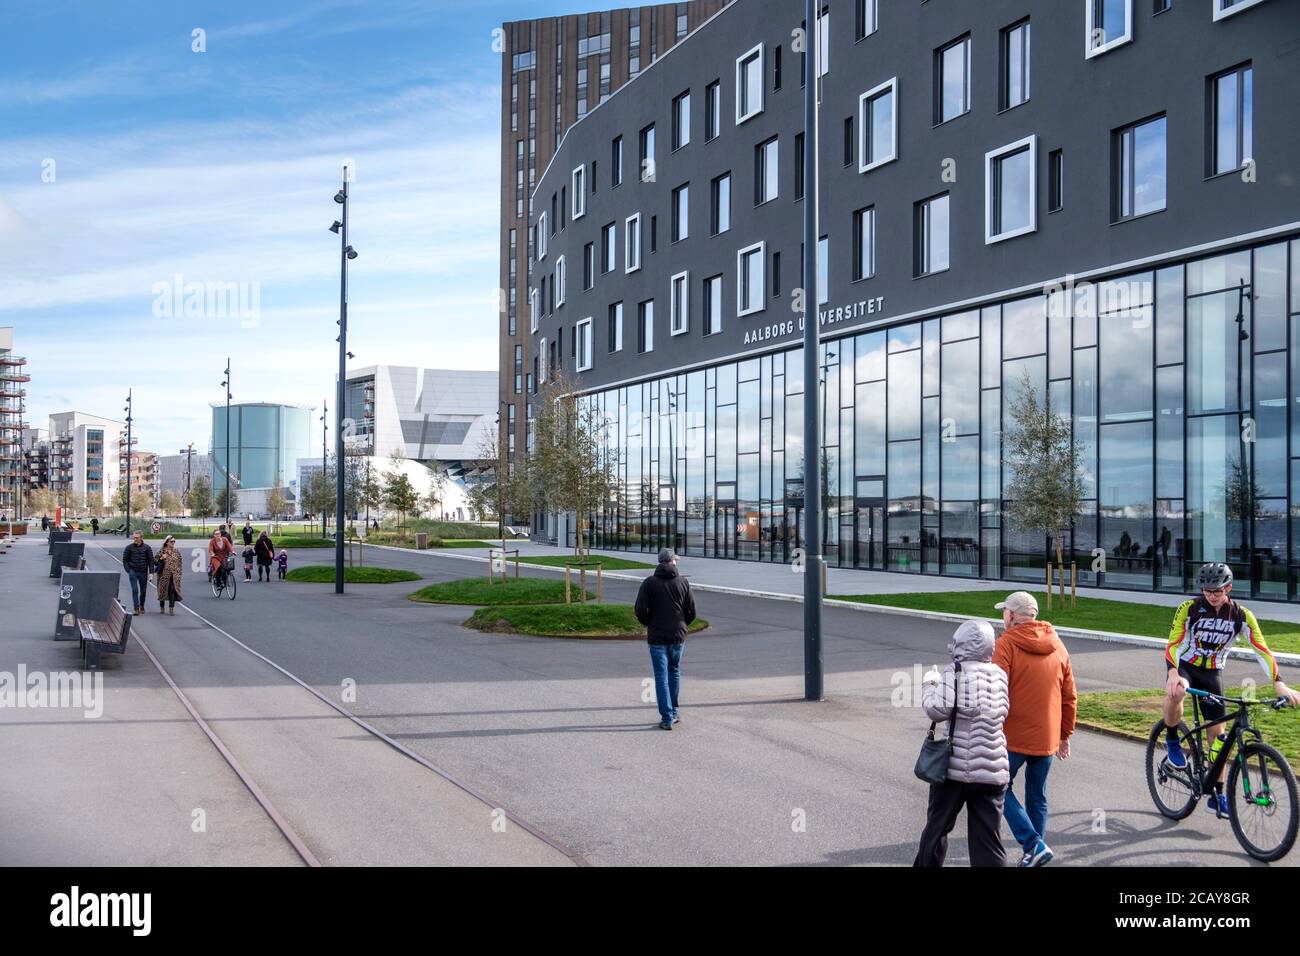 rejuvenated industrial area on waterfront with modern architecture, Aalborg, Denmark, Stock Photo